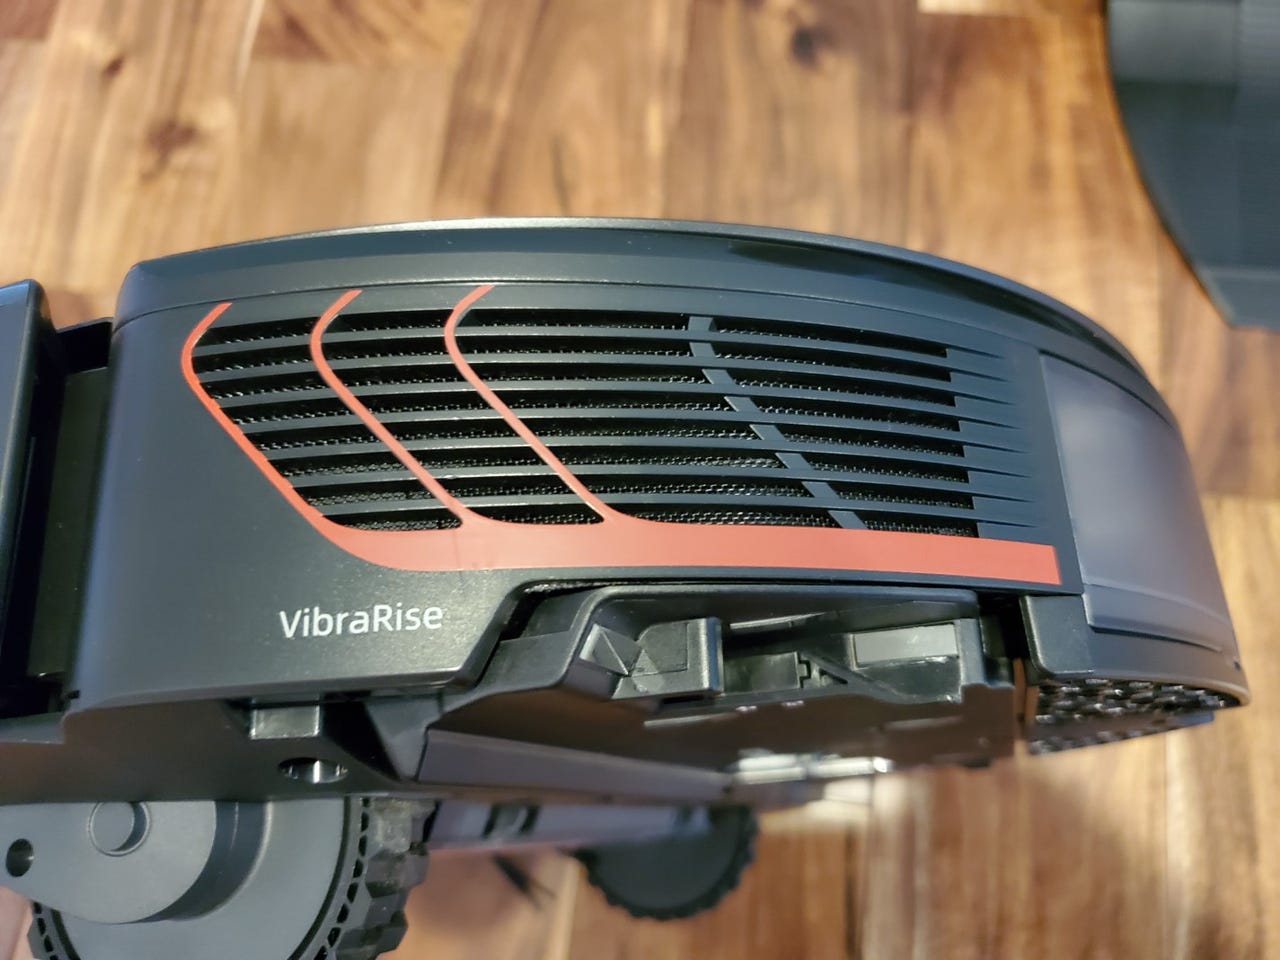 Roborock S7 Review: Setting The Bar Again, On Robot Mopping!